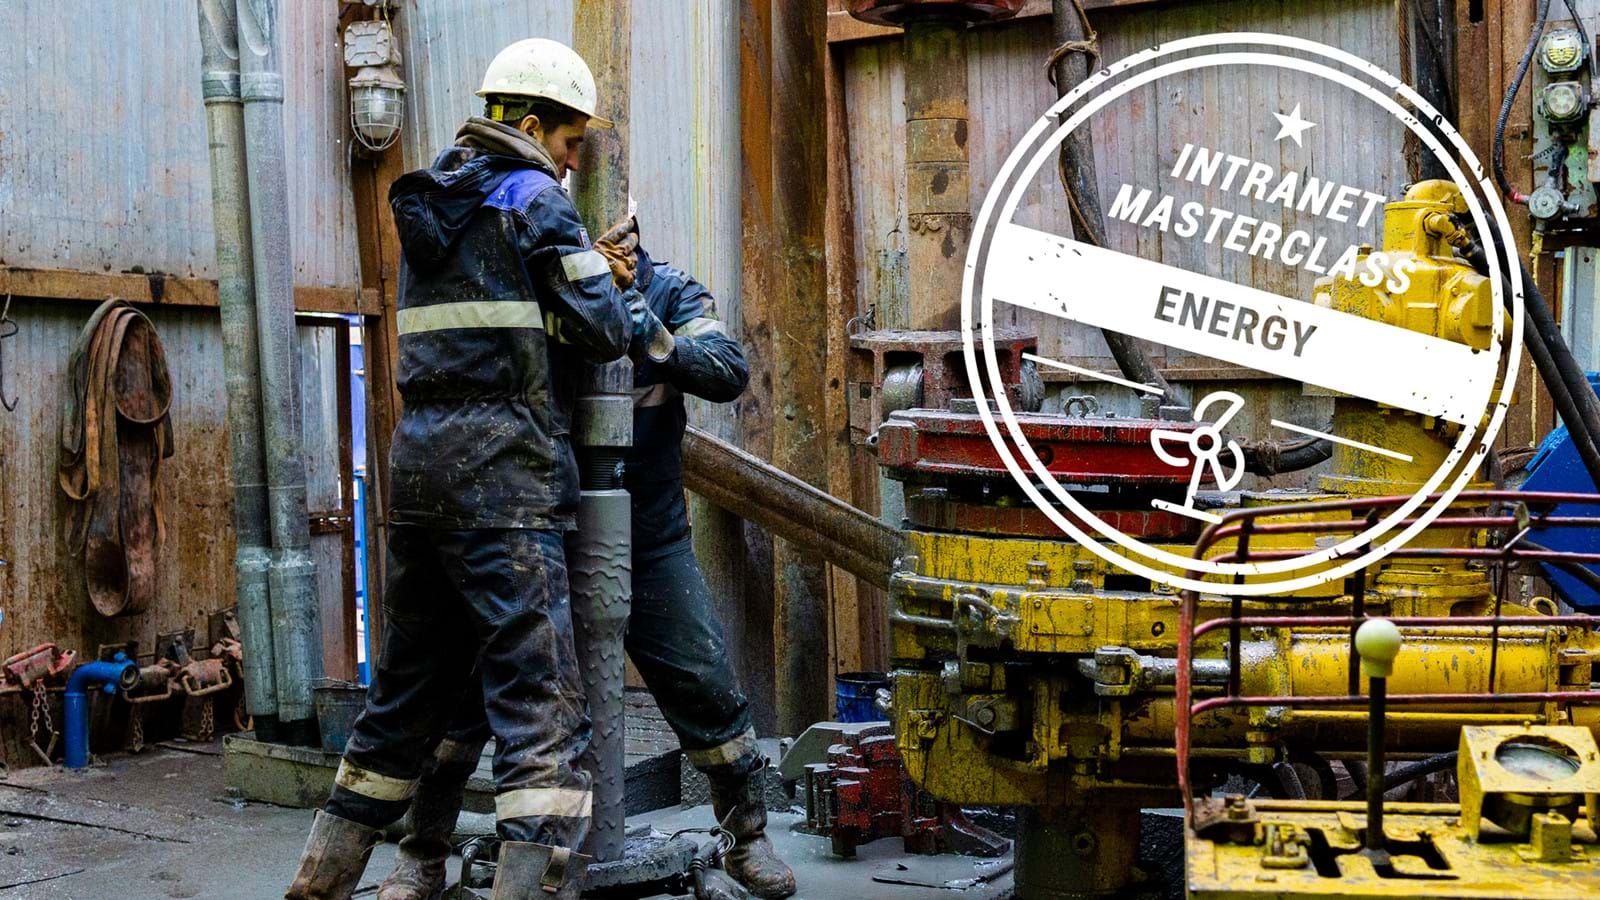 Level up employee experience in the energy industry with an intranet masterclass webinar